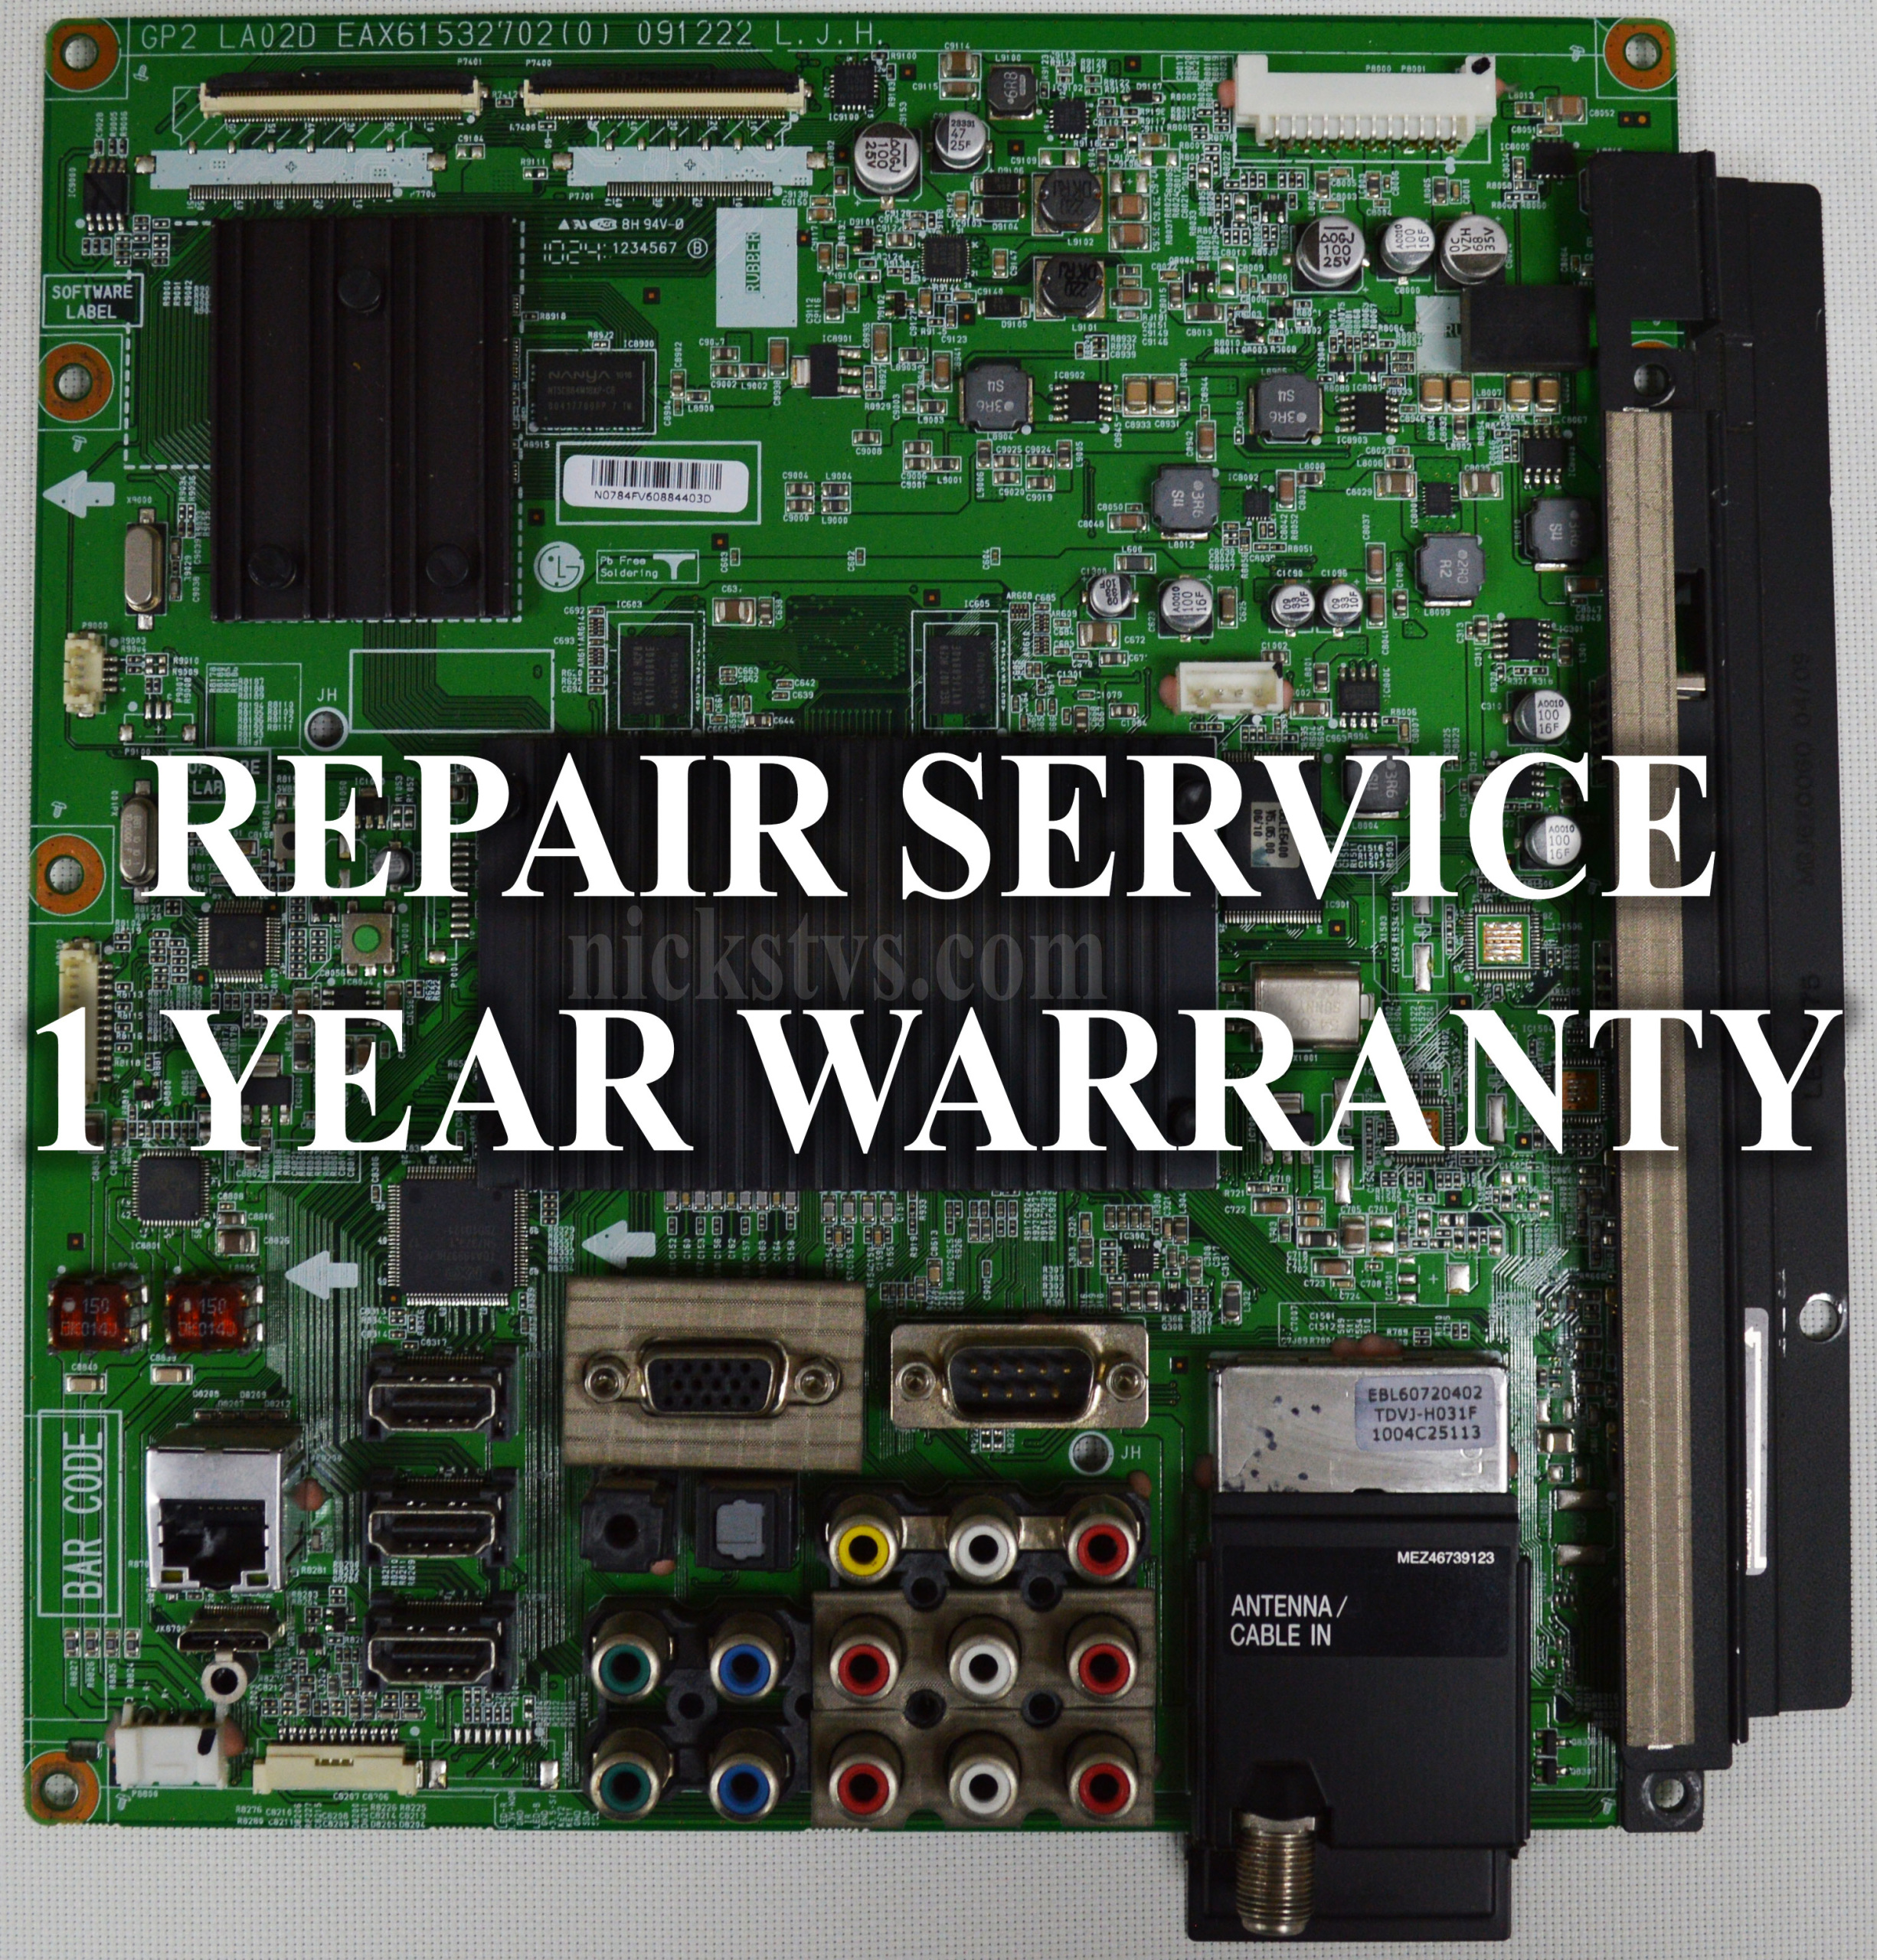 Mail-in Repair Service LG 42LE5400 MAINBOARD 